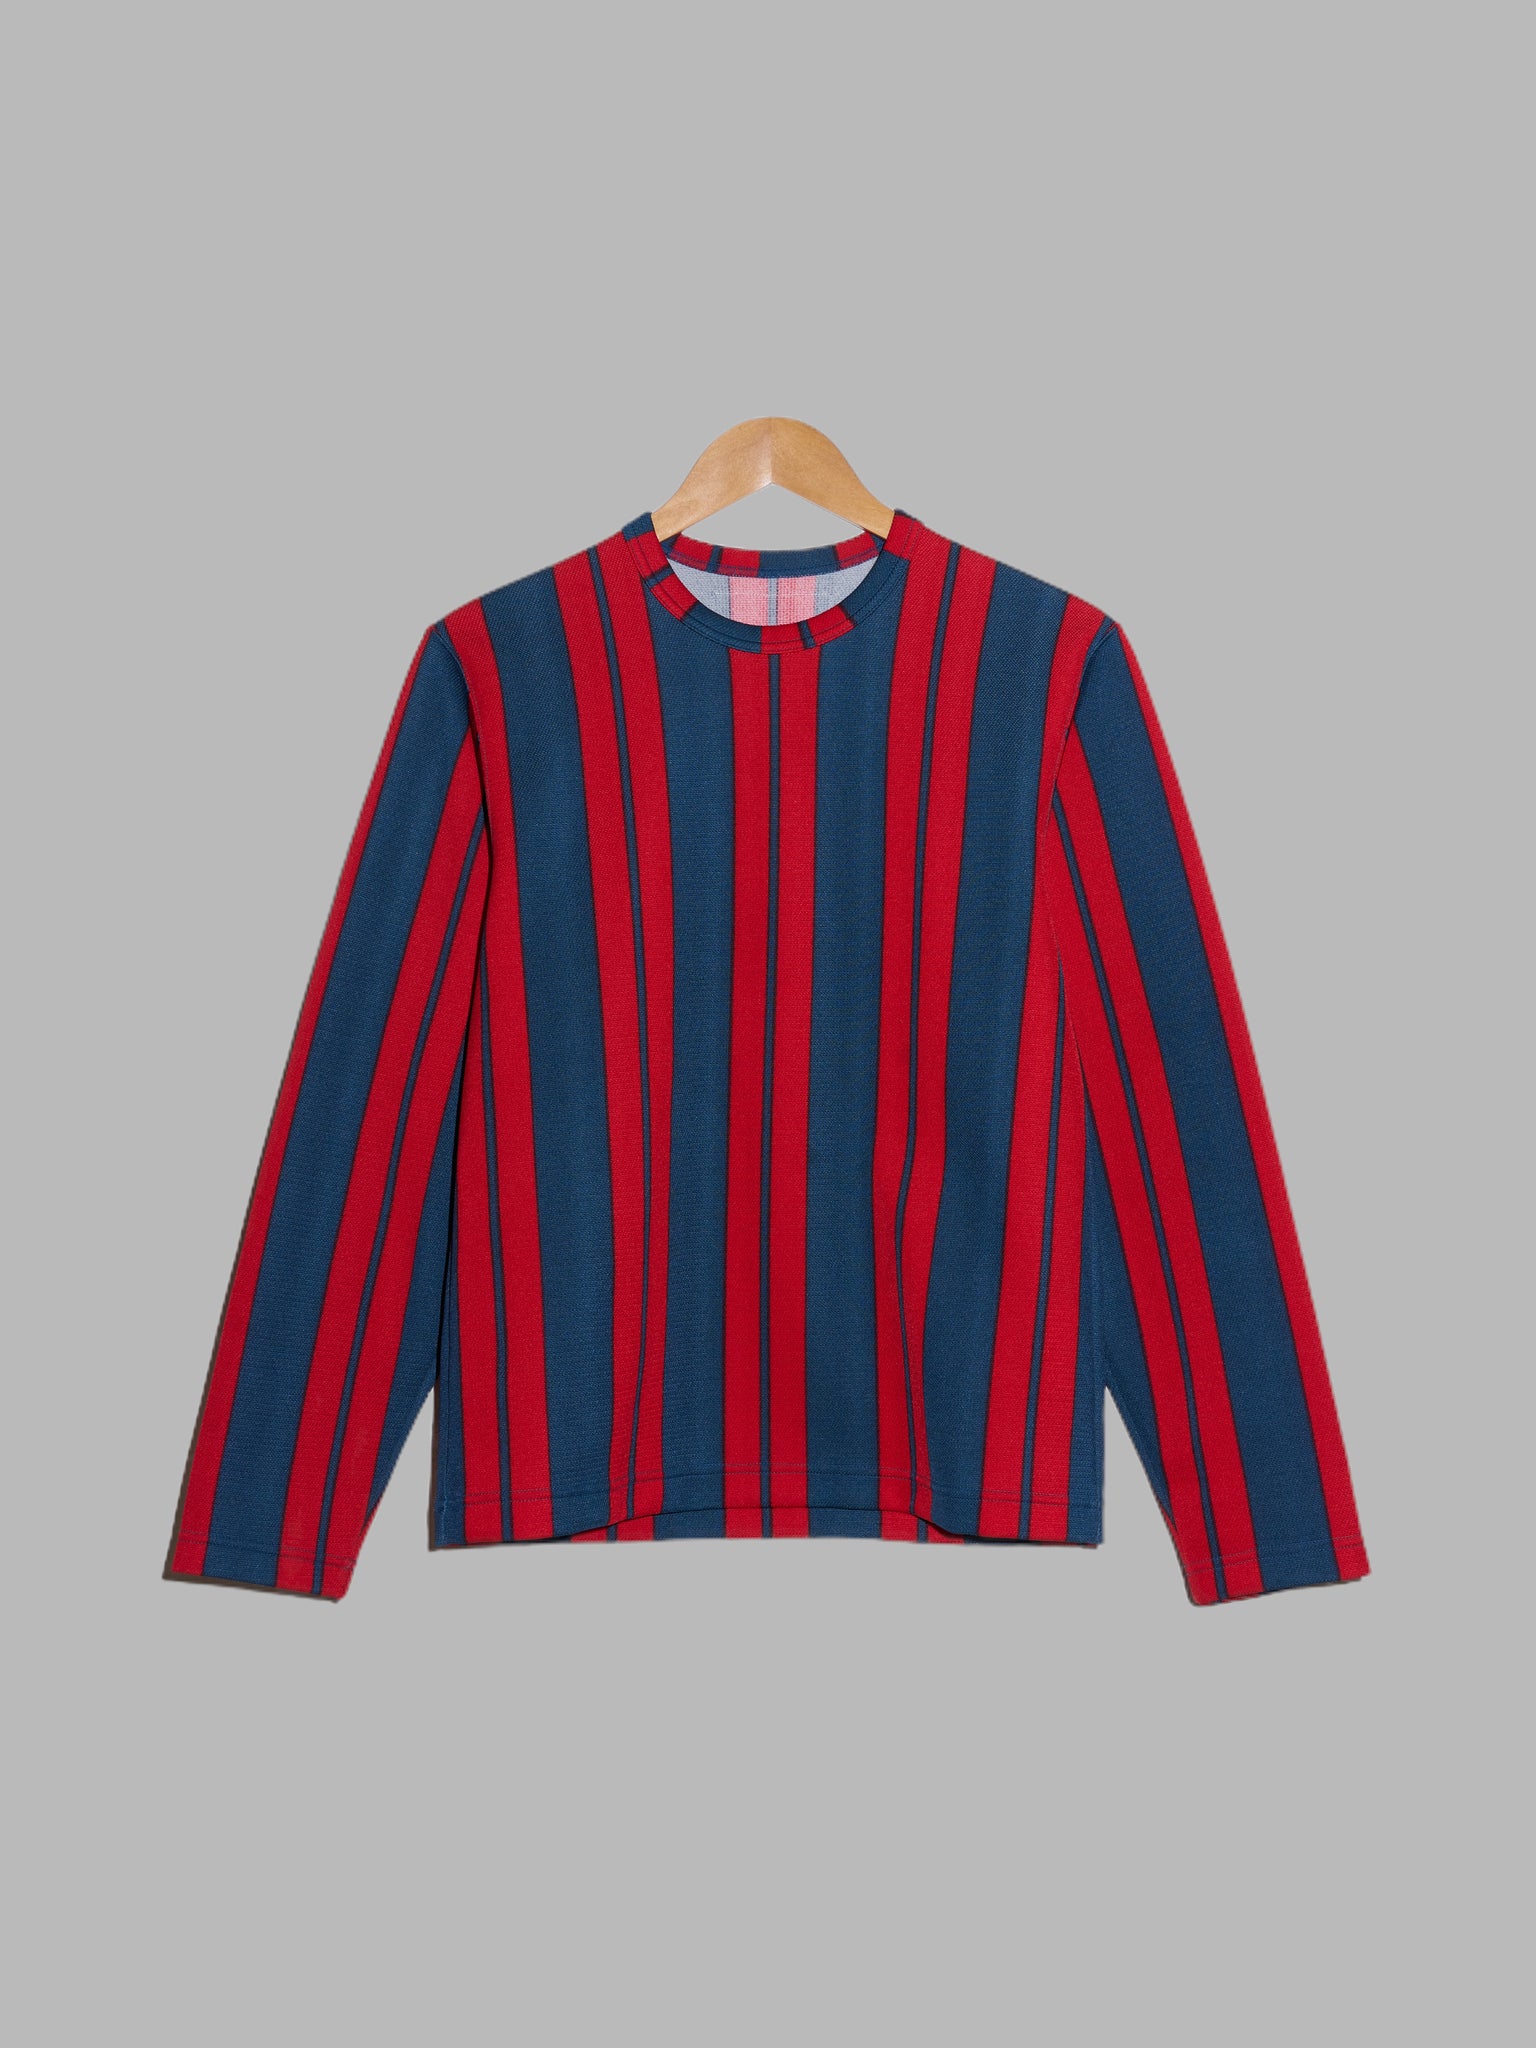 Comme des Garcons Homme 2000 blue and red striped polyester long sleeve top - S